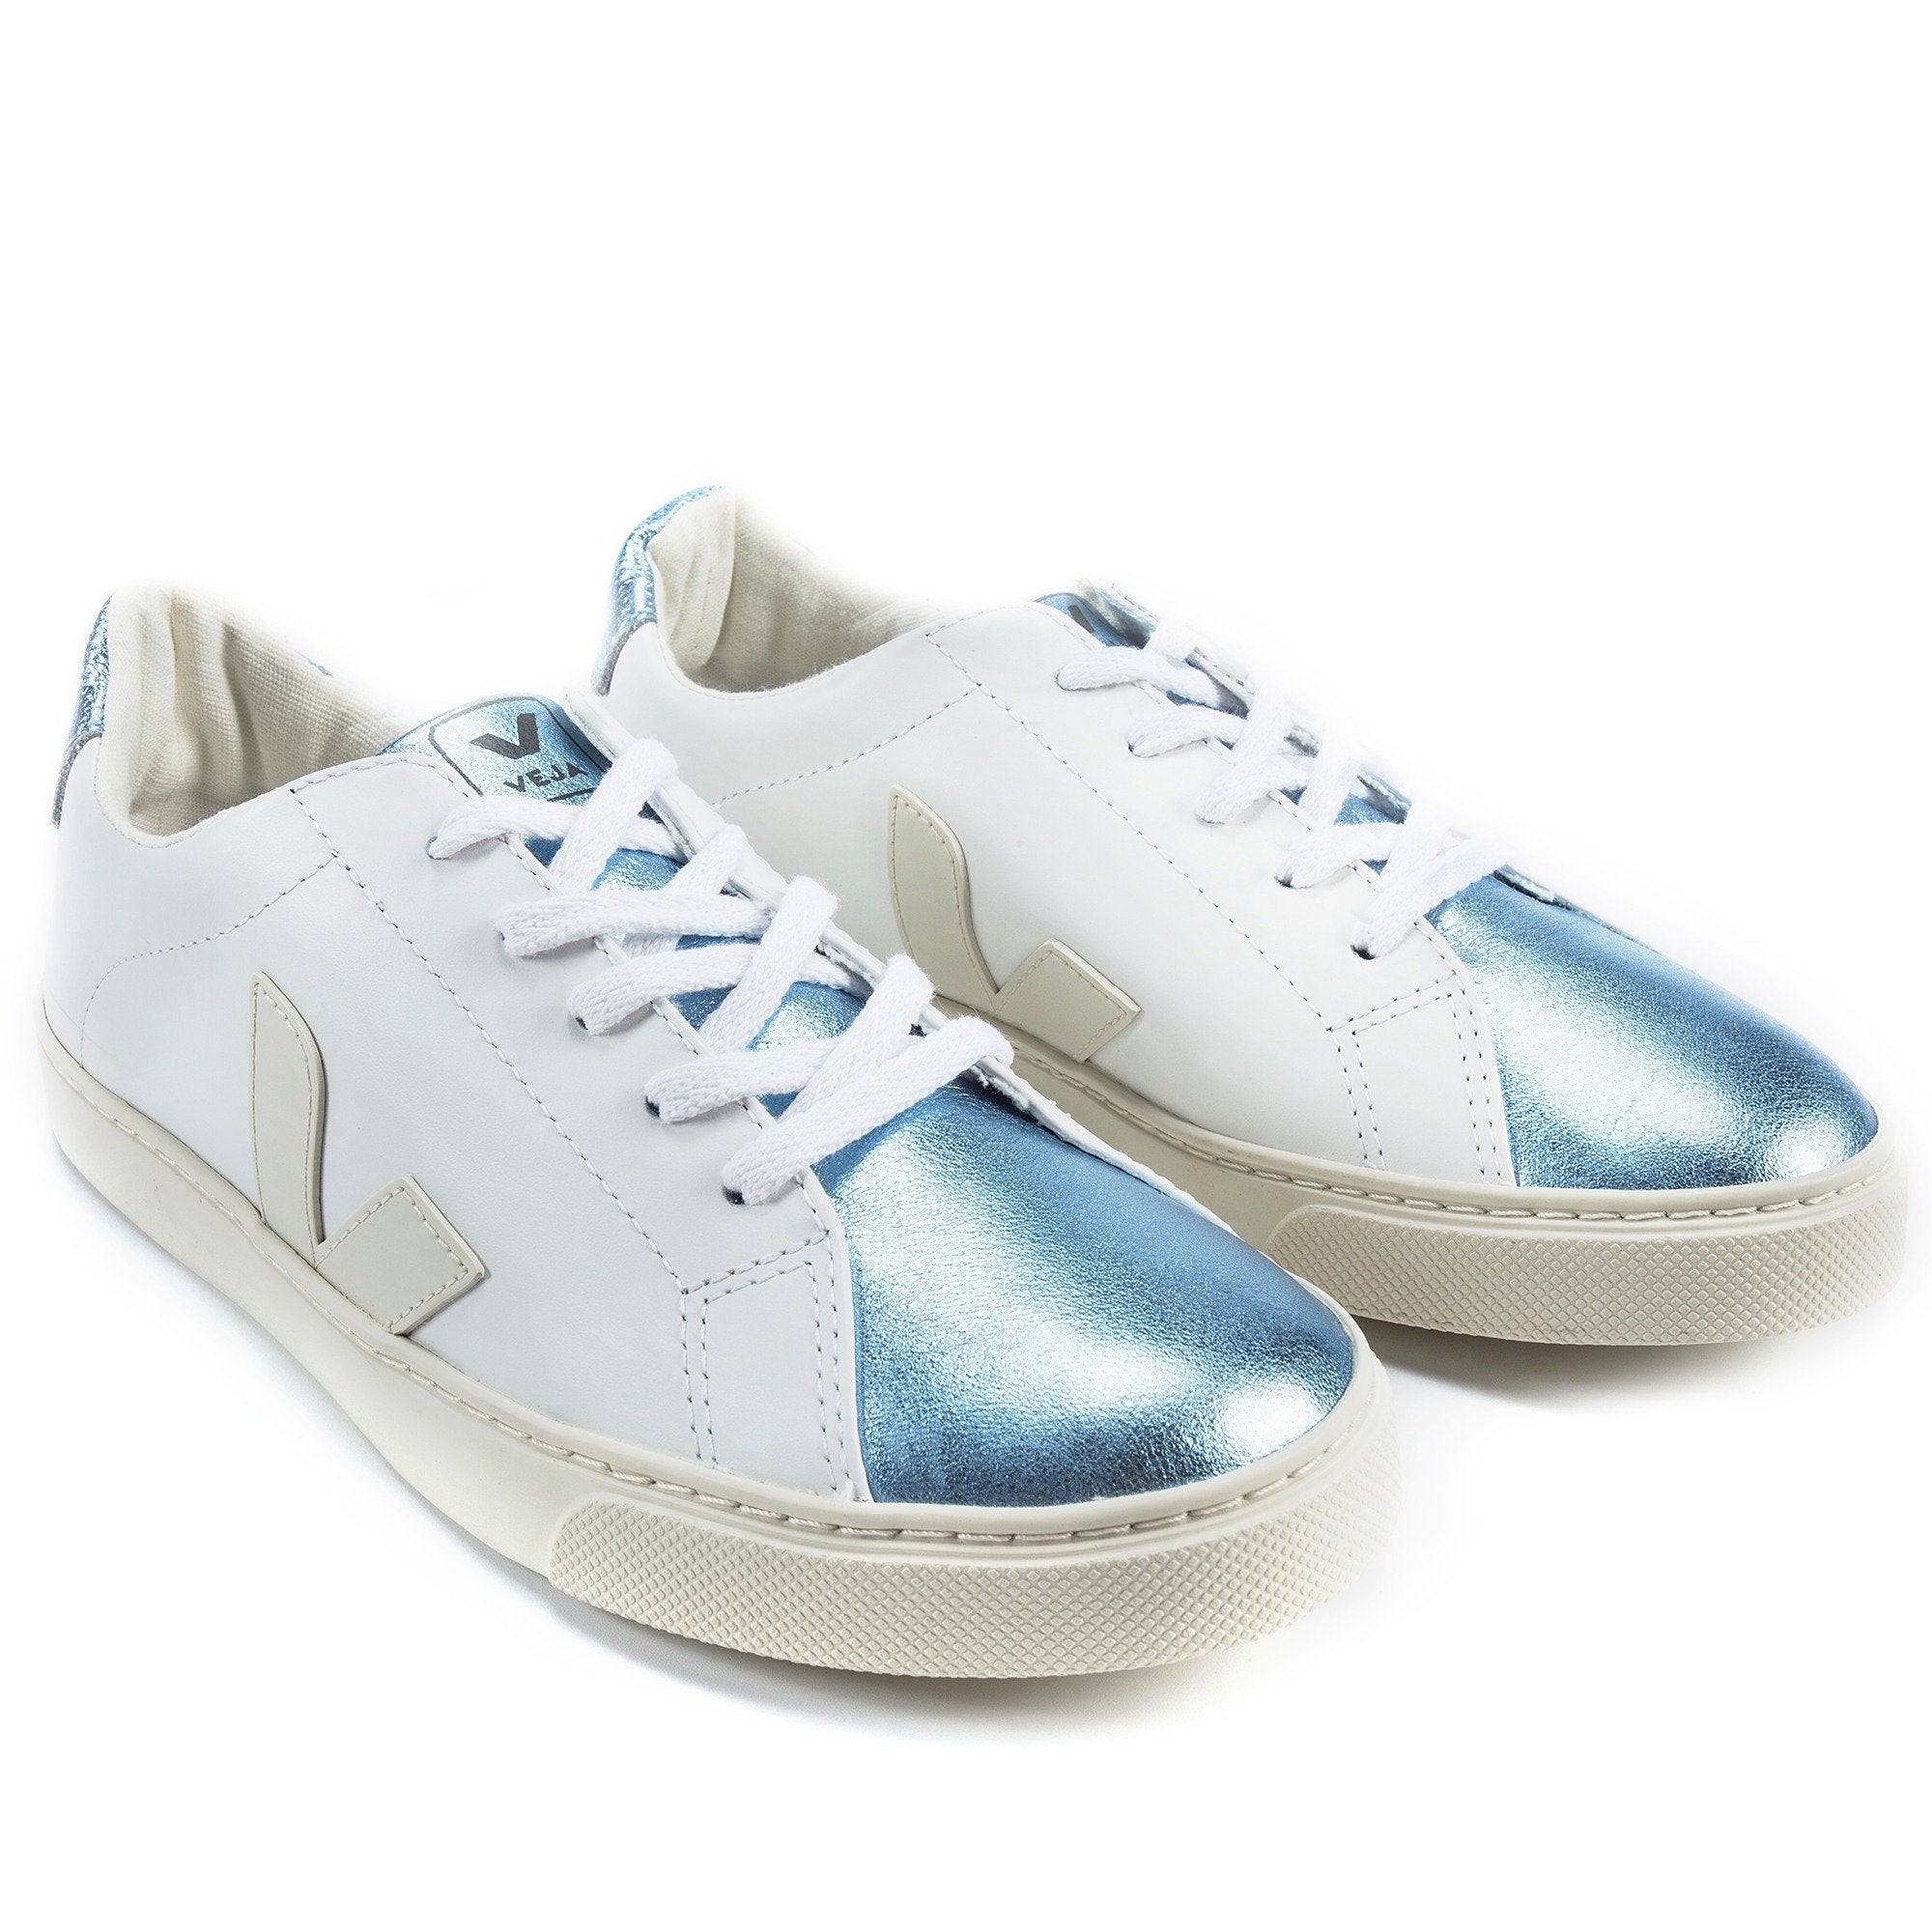 Girls White Leather With White "V" Shoes